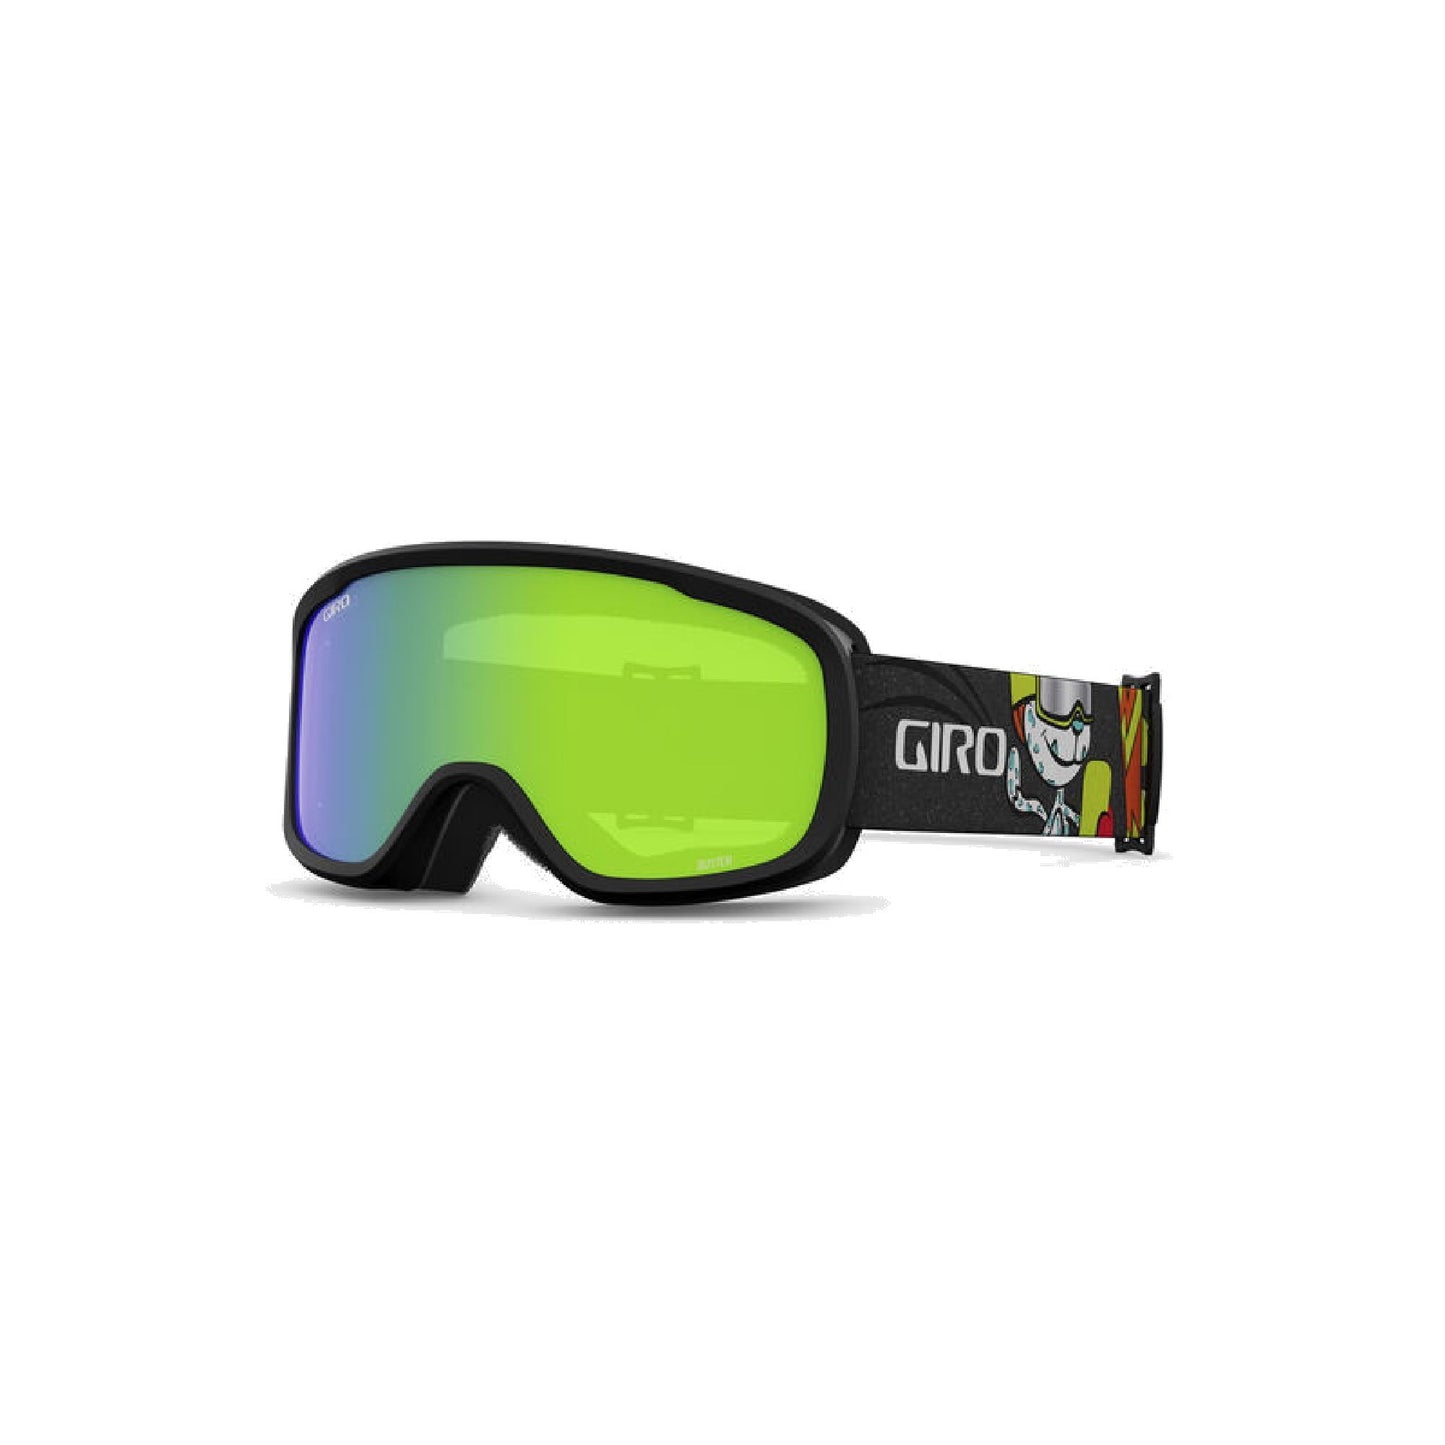 Giro Youth Buster Snow Goggles Black Ashes Loden Green Snow Goggles